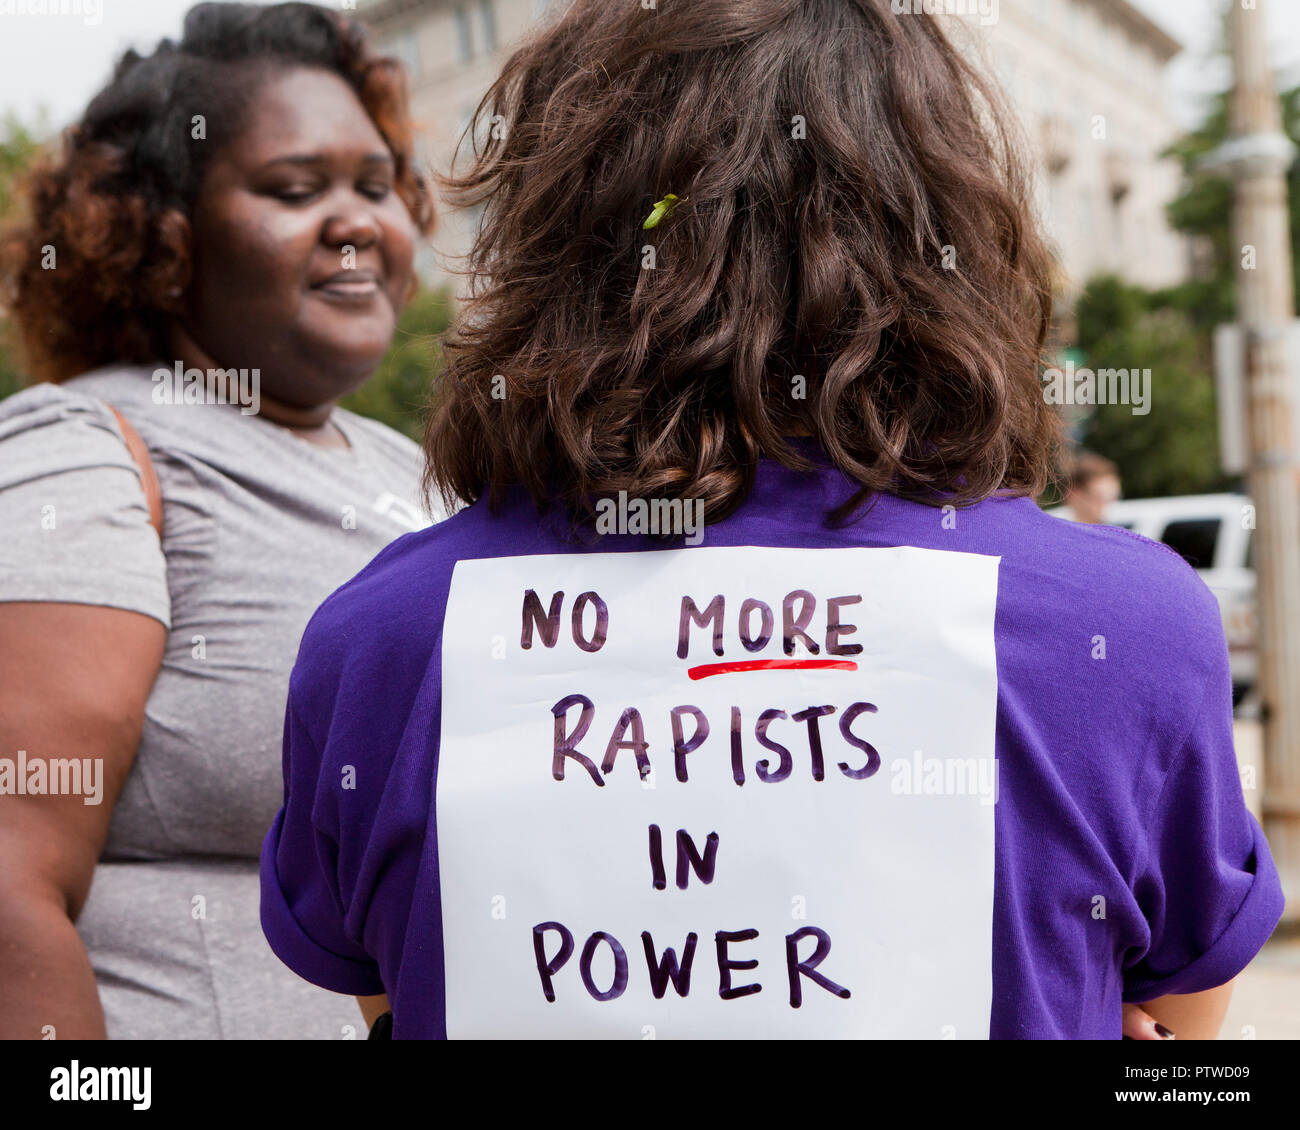 Washington, DC, October 6th, 2018: Woman protesting on the day of the final confirmation vote of Brett Kavanaugh as Justice of the US Supreme Court. Stock Photo